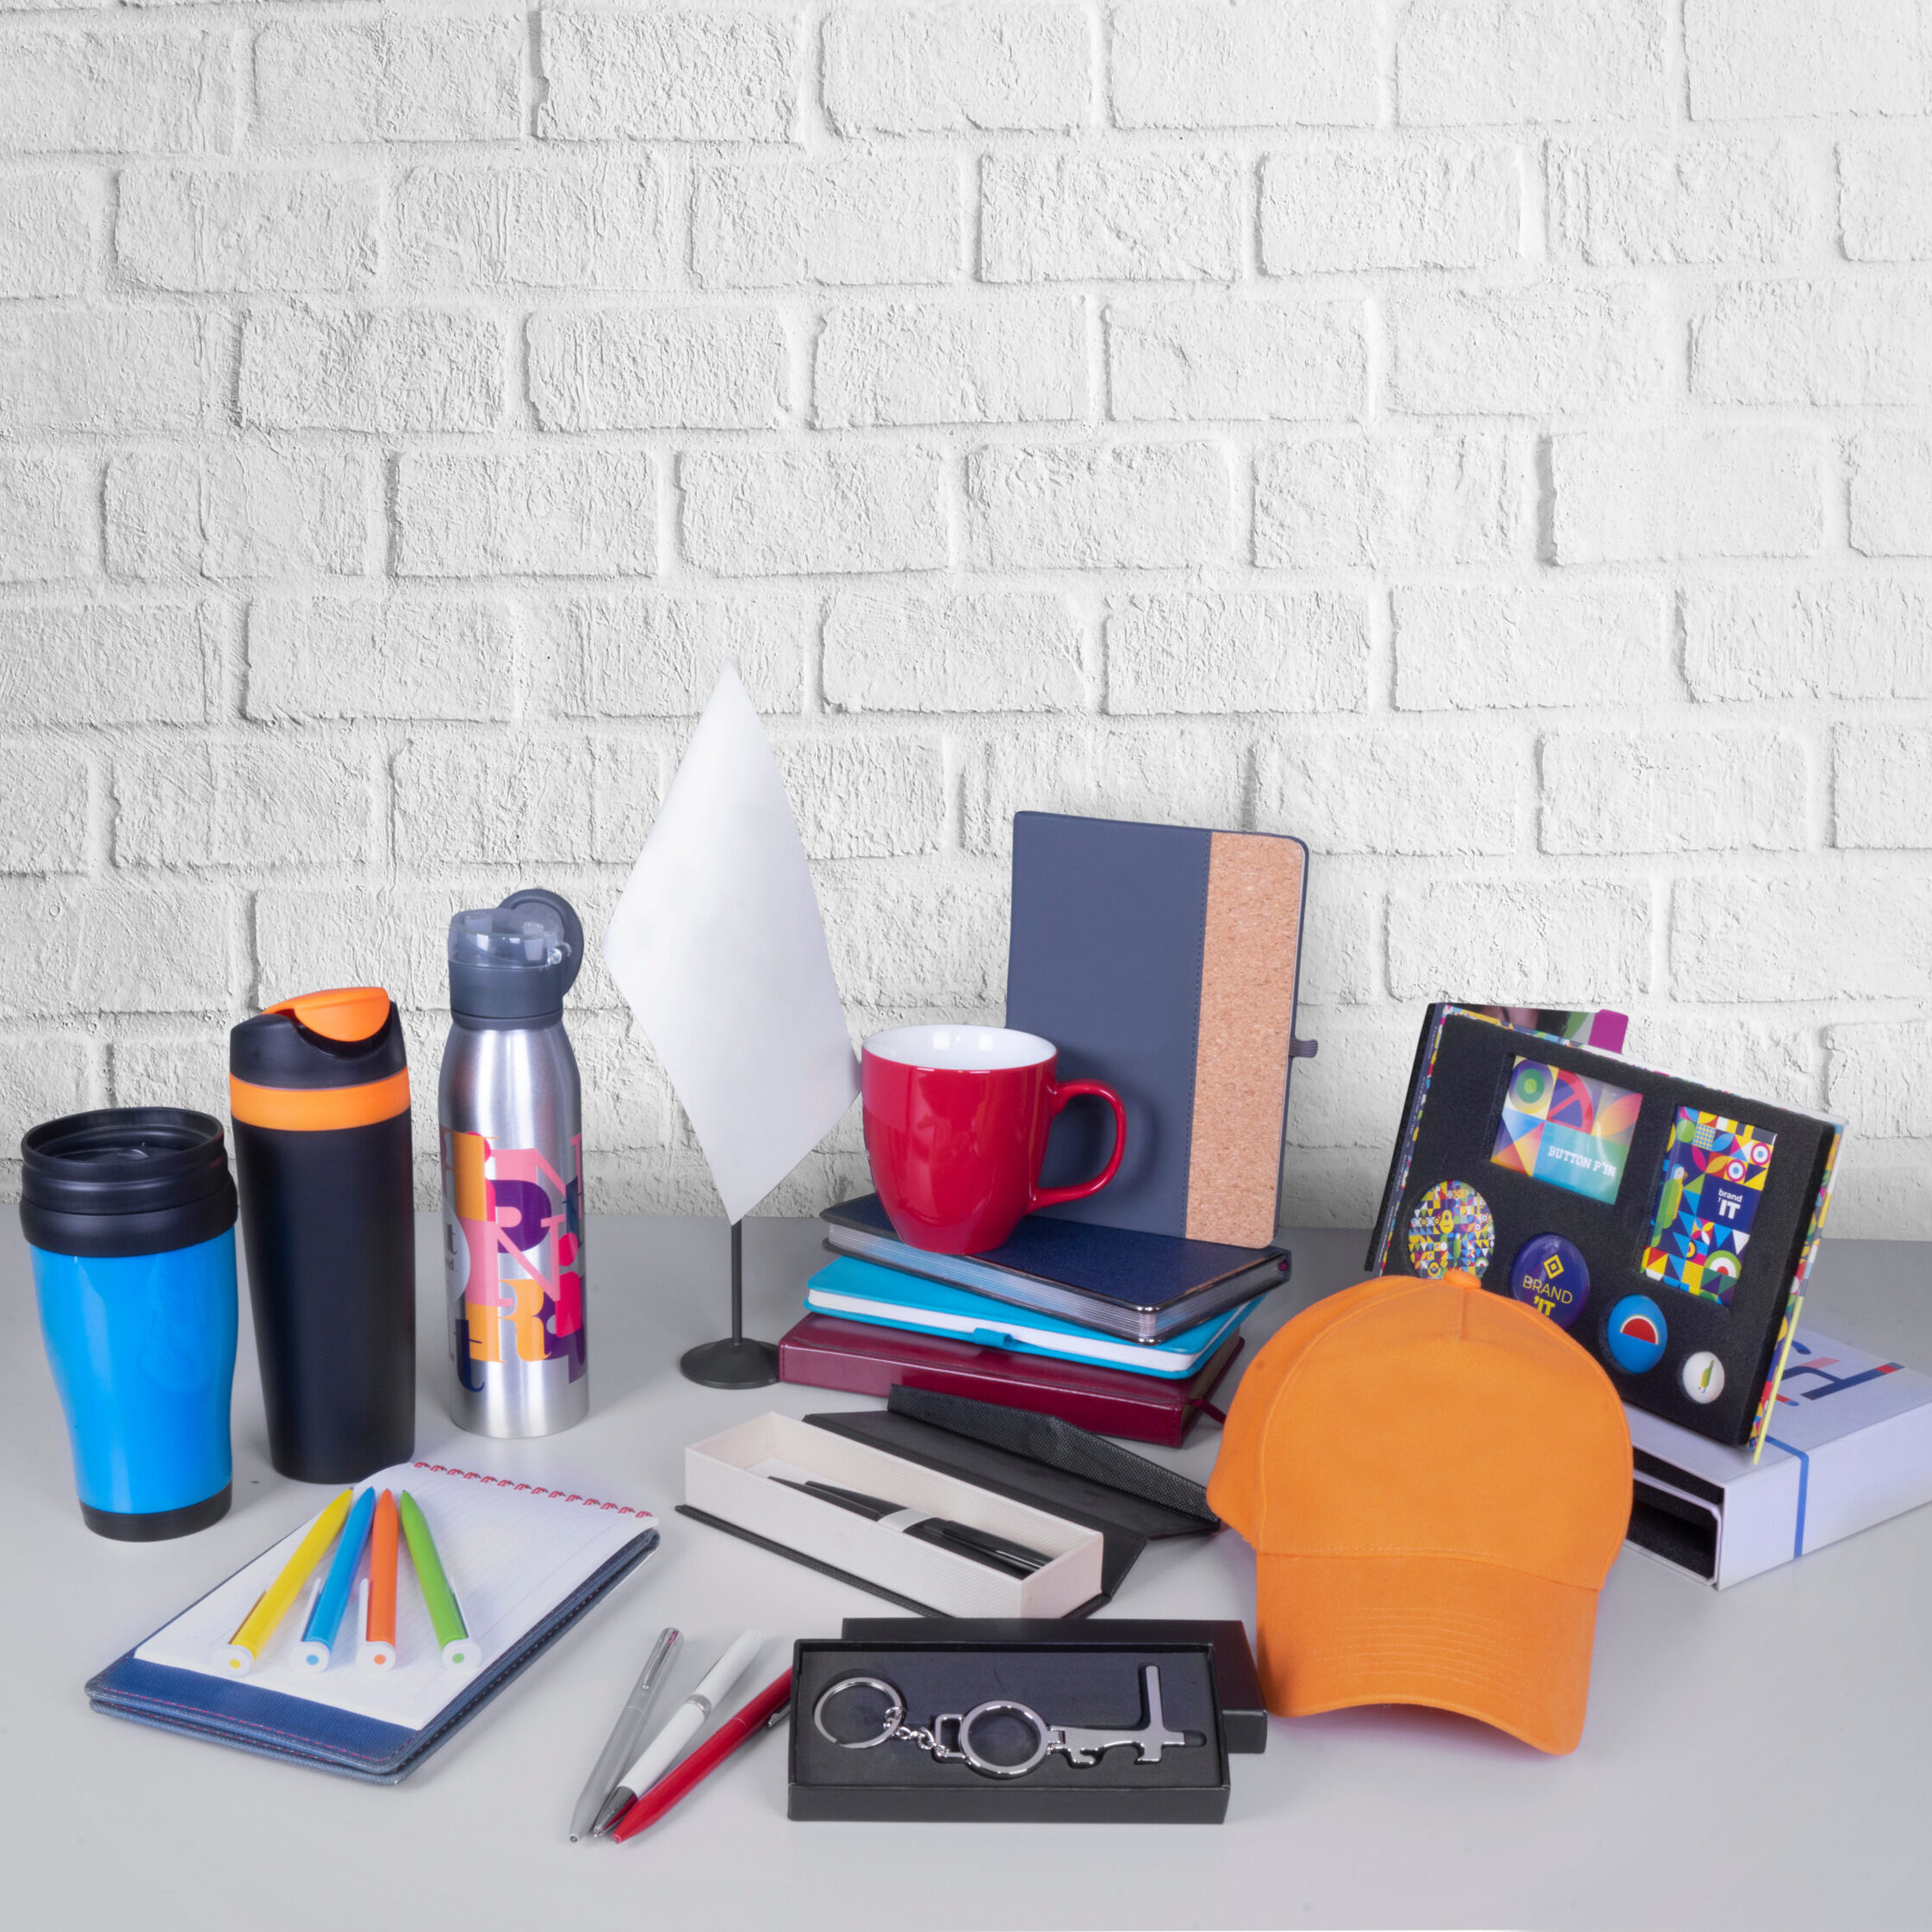 Promotional Products | SnapMe Creative Monroe